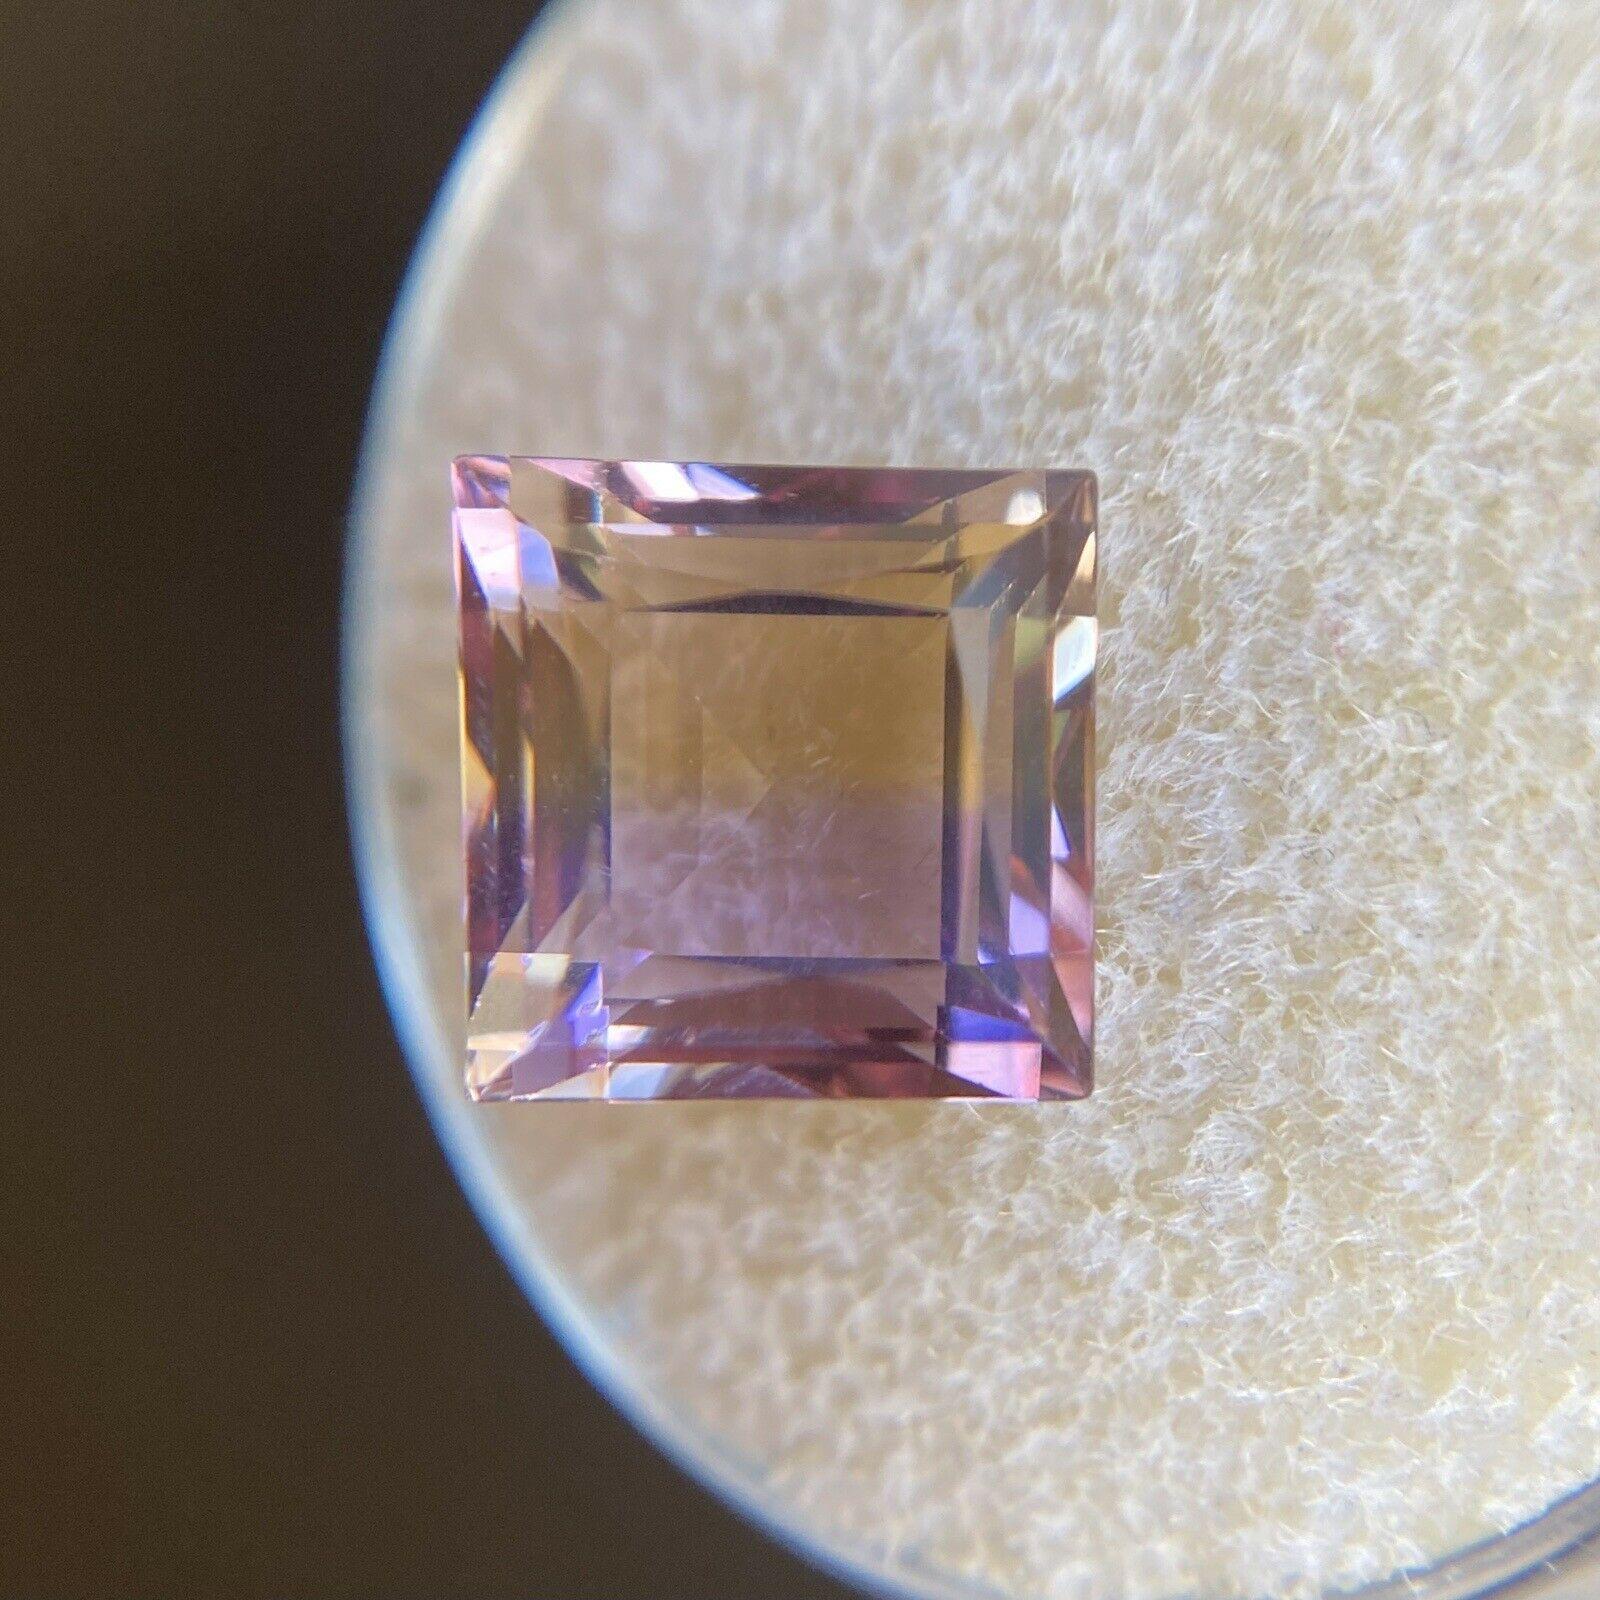 4.51ct Ametrine Purple Yellow Bi Colour Loose Gem 9.2mm Square Cut Unique Gem

Natural Ametrine Gemstone. 
4.51 Natural Ametrine with an excellent square princess cut and beautiful colour split of yellow and purple. 
Also has excellent clarity with